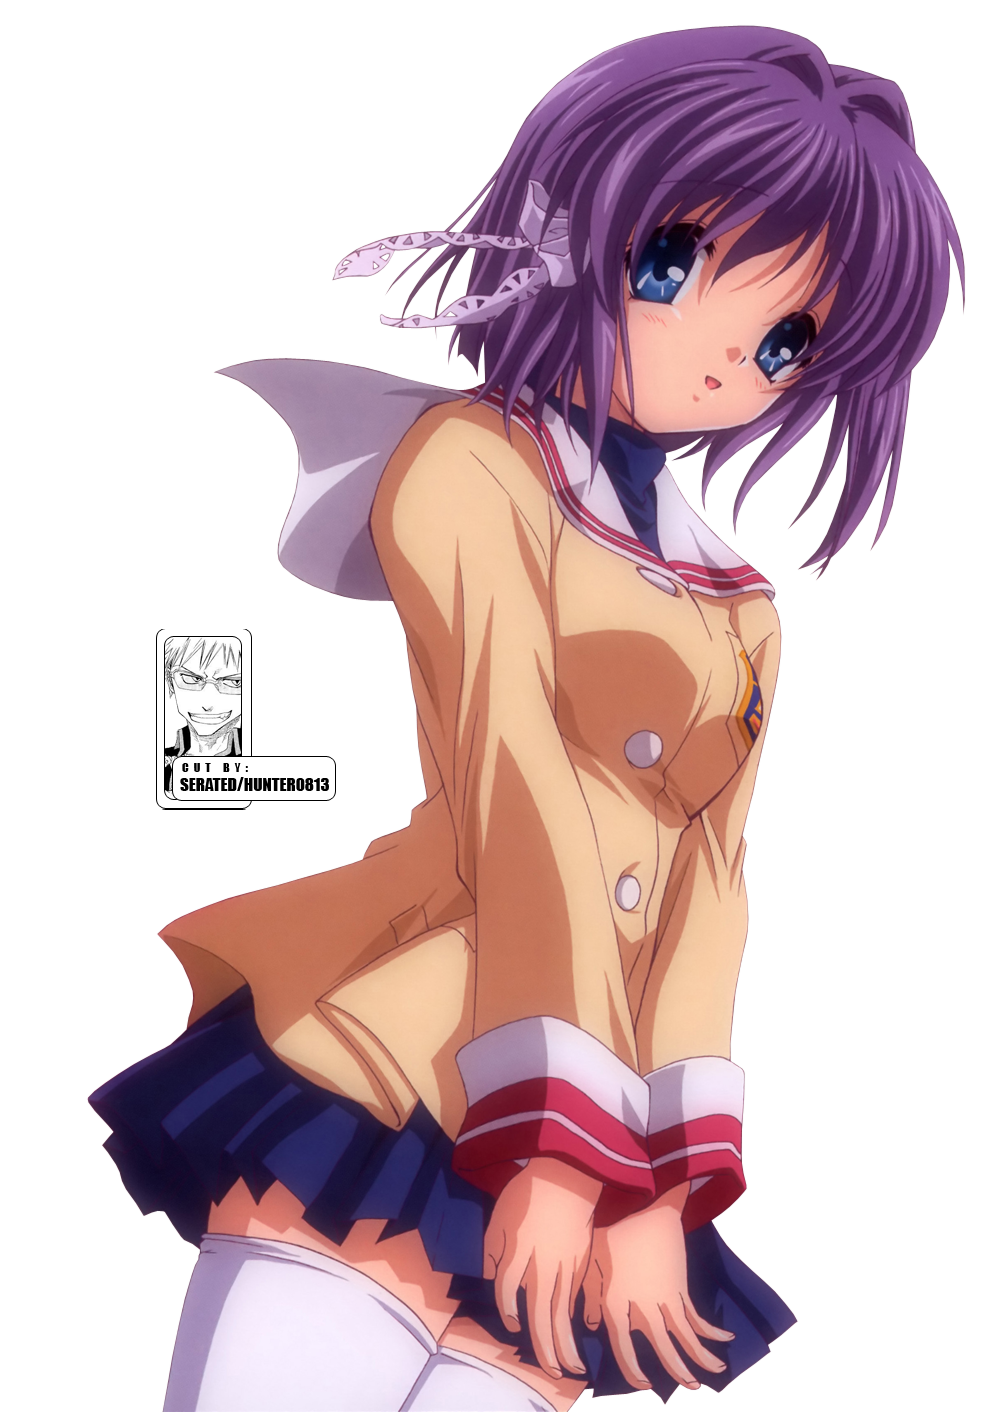 http://yinyanganime.com/serated/Extractions/Anime/Clannad/Clannad-Render-2.png